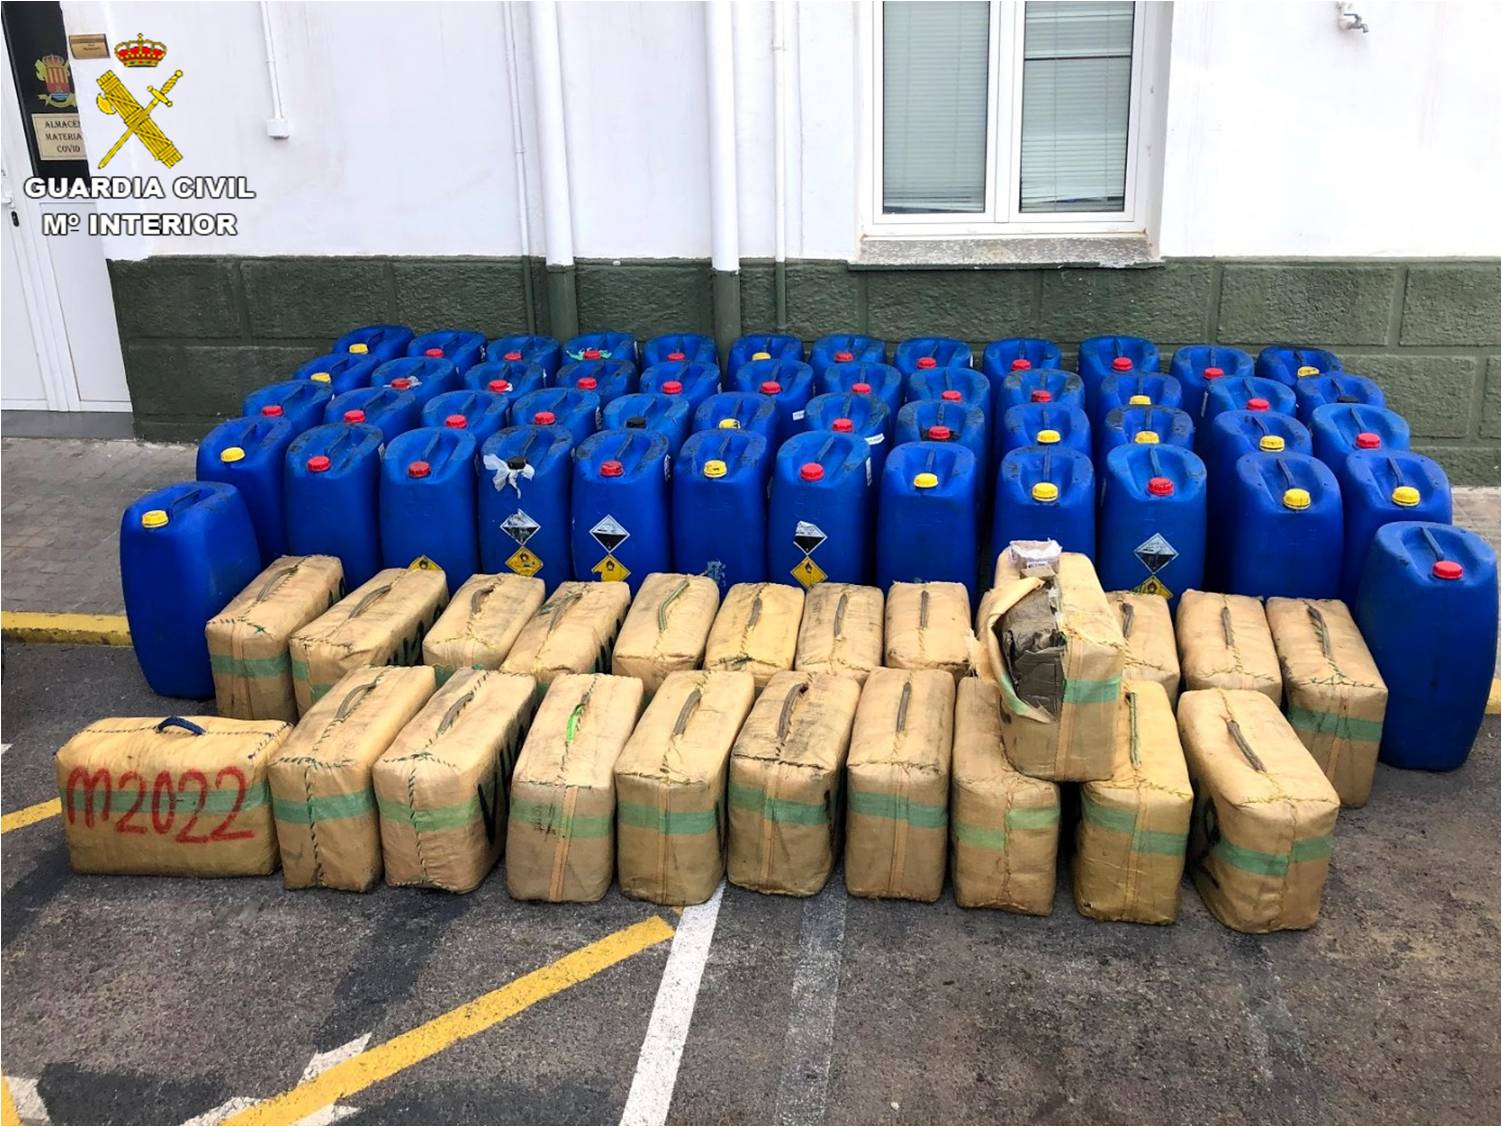 Yacht Was Camouflaged As A Fishing Boat To Smuggle Tons Of Drugs Into A Costa Blanca Port In Spain